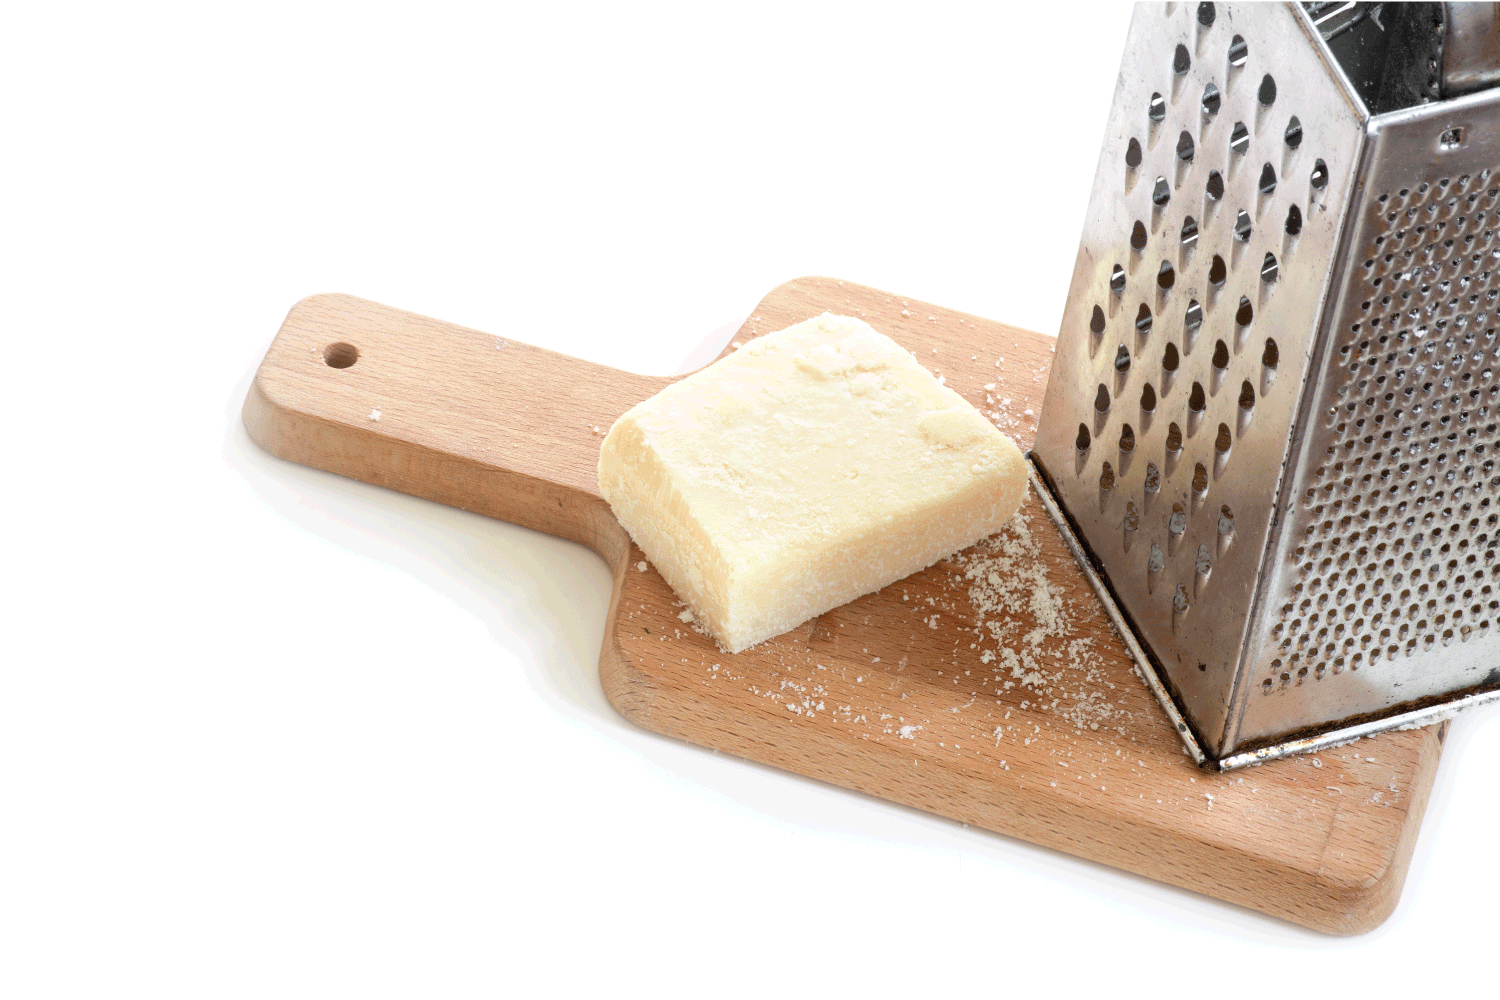 Parmesan cheese and metal grater on a kitchen board